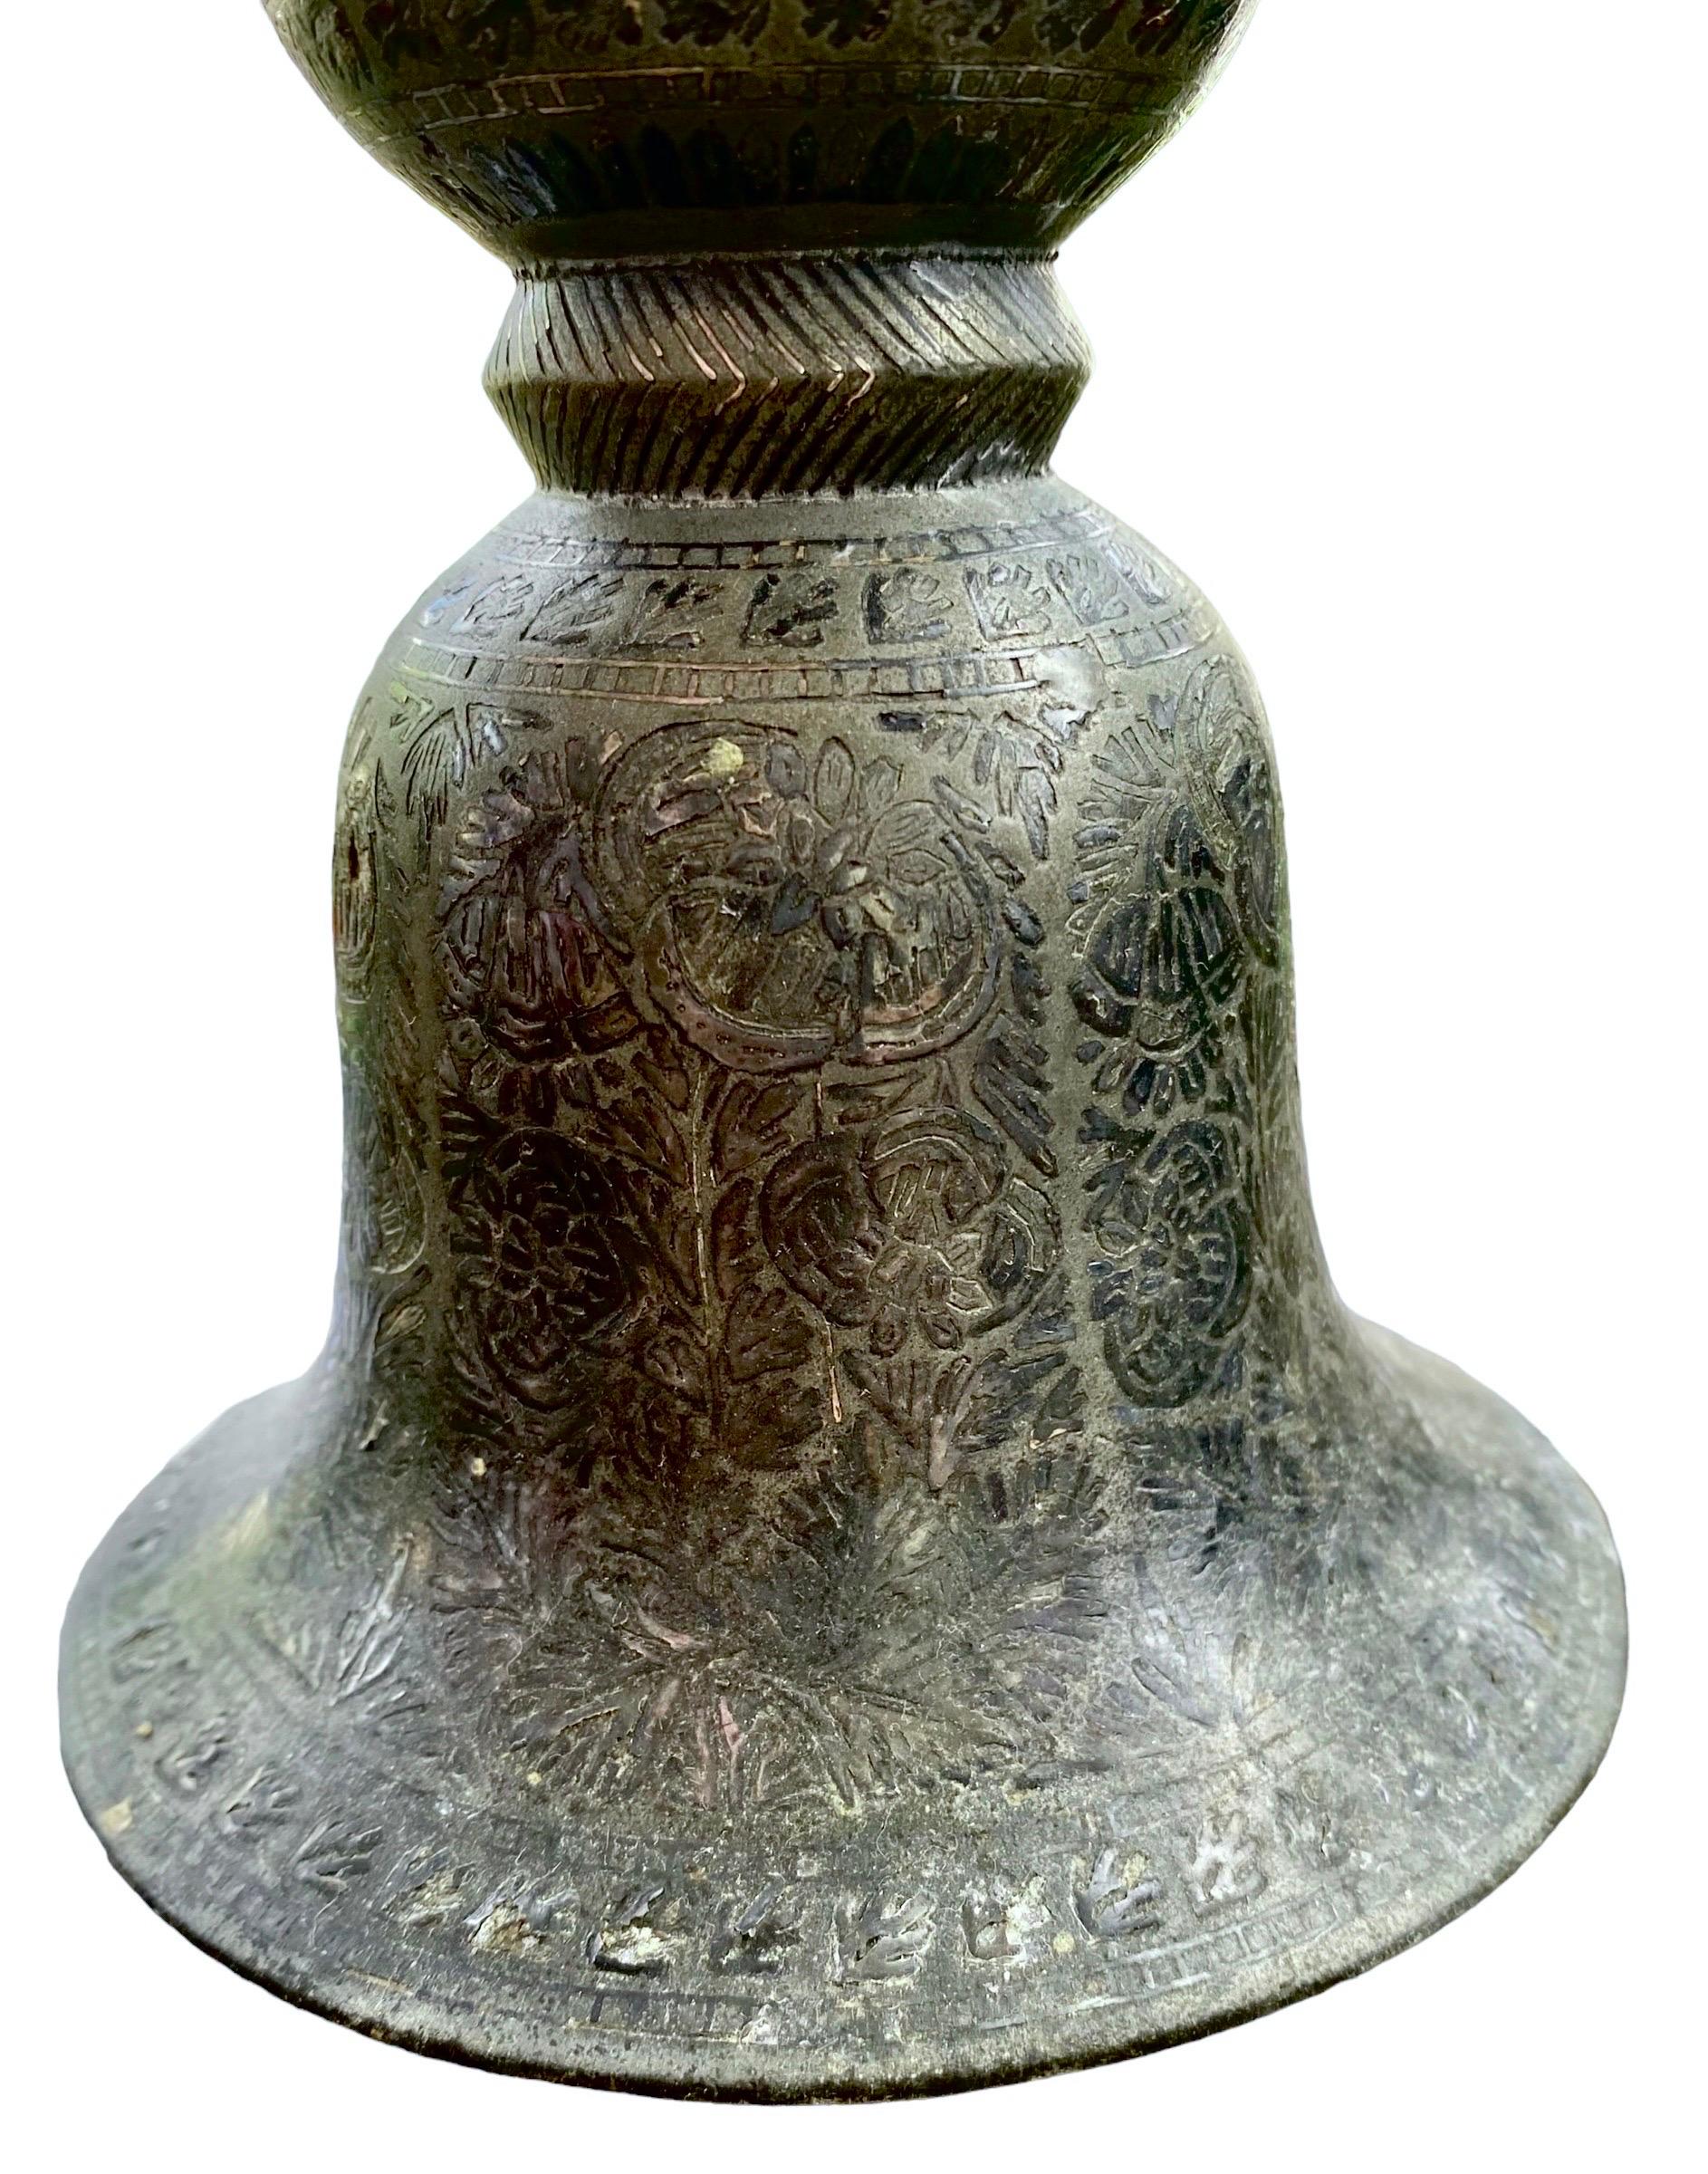 This antique, Indian bidri spitoon (Peekdaan or Thookadaan) is cast as an opposing double bell-shape, with the exterior decorated with oval reserves of stylized, poppies, a common motif in bidriware. From Bidar, Deccan in South West India.

